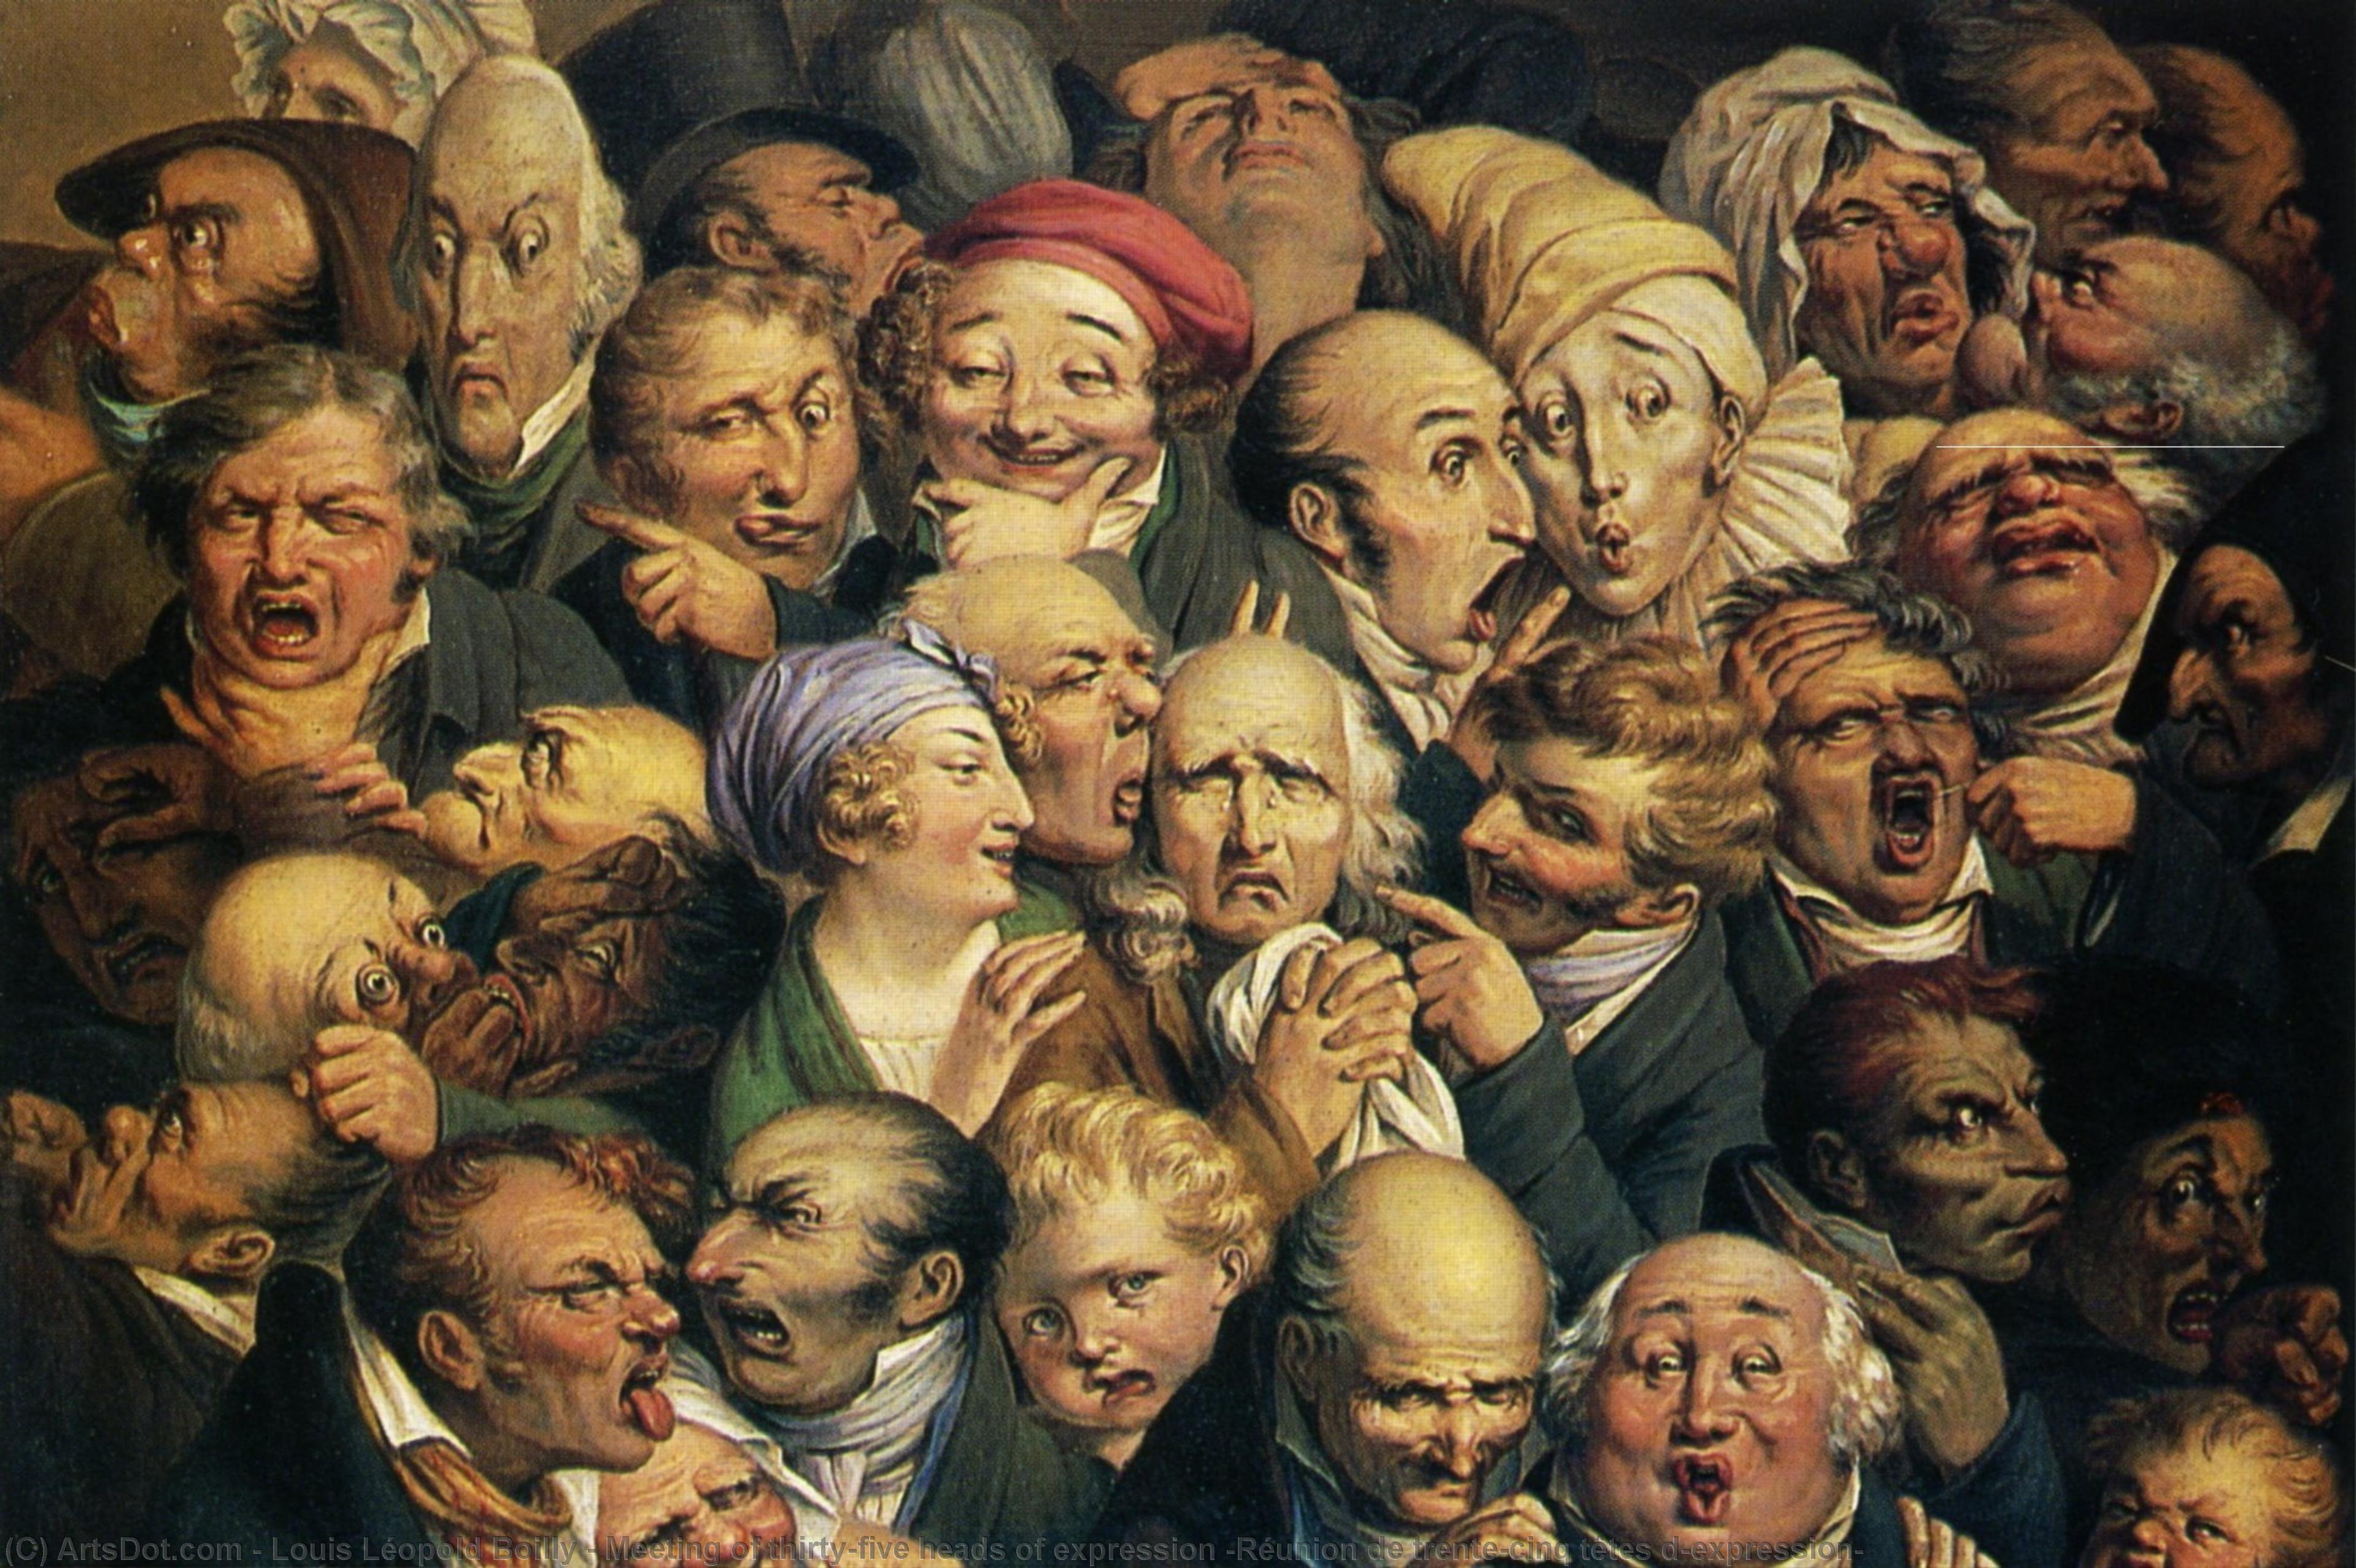 WikiOO.org - Encyclopedia of Fine Arts - Maalaus, taideteos Louis Léopold Boilly - Meeting of thirty-five heads of expression (Réunion de trente-cinq têtes d'expression)